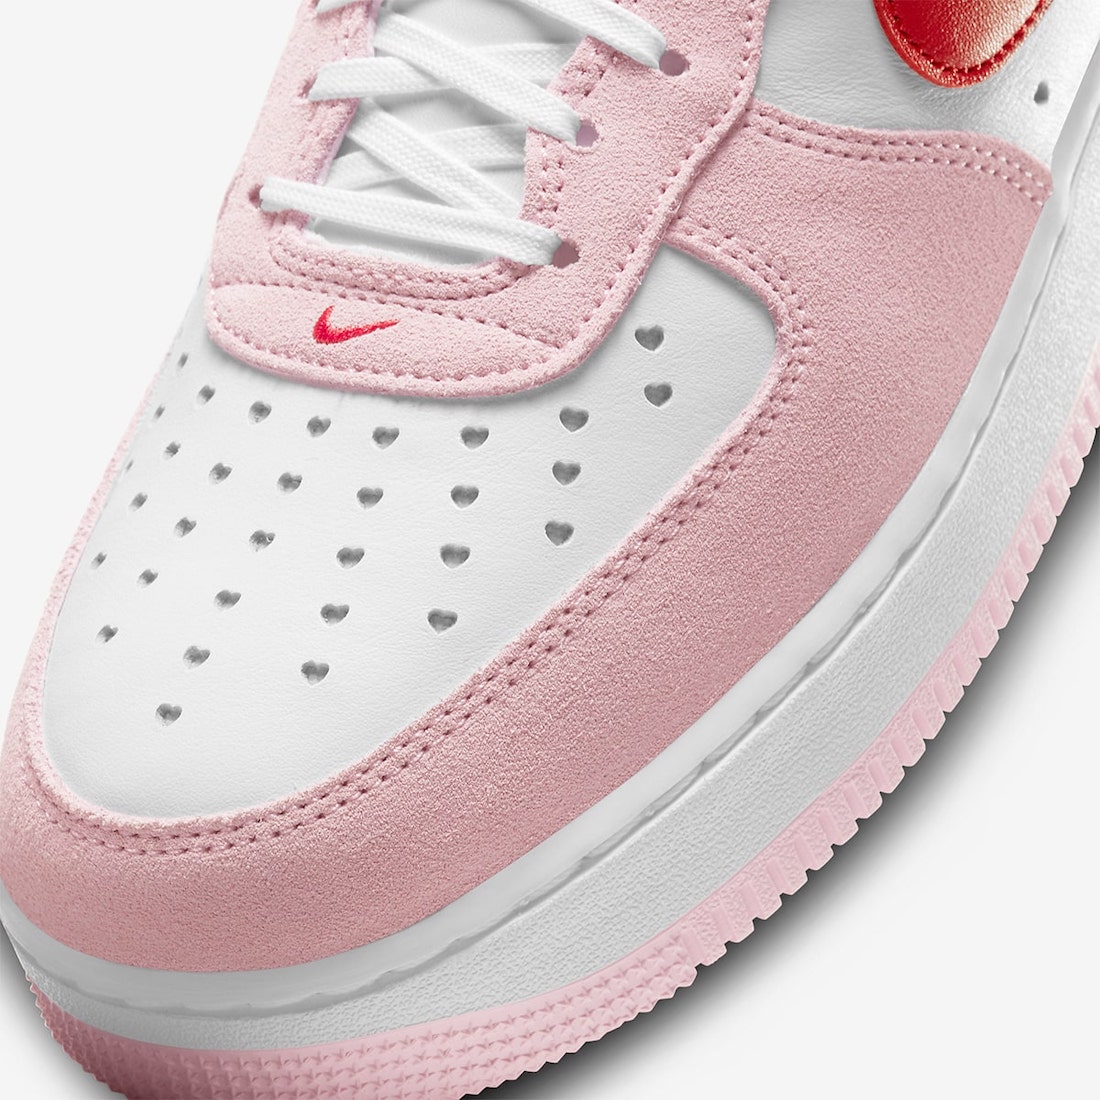 Nike Adds a “Love Letter” Air Force 1 to its Valentine's Day Lineup